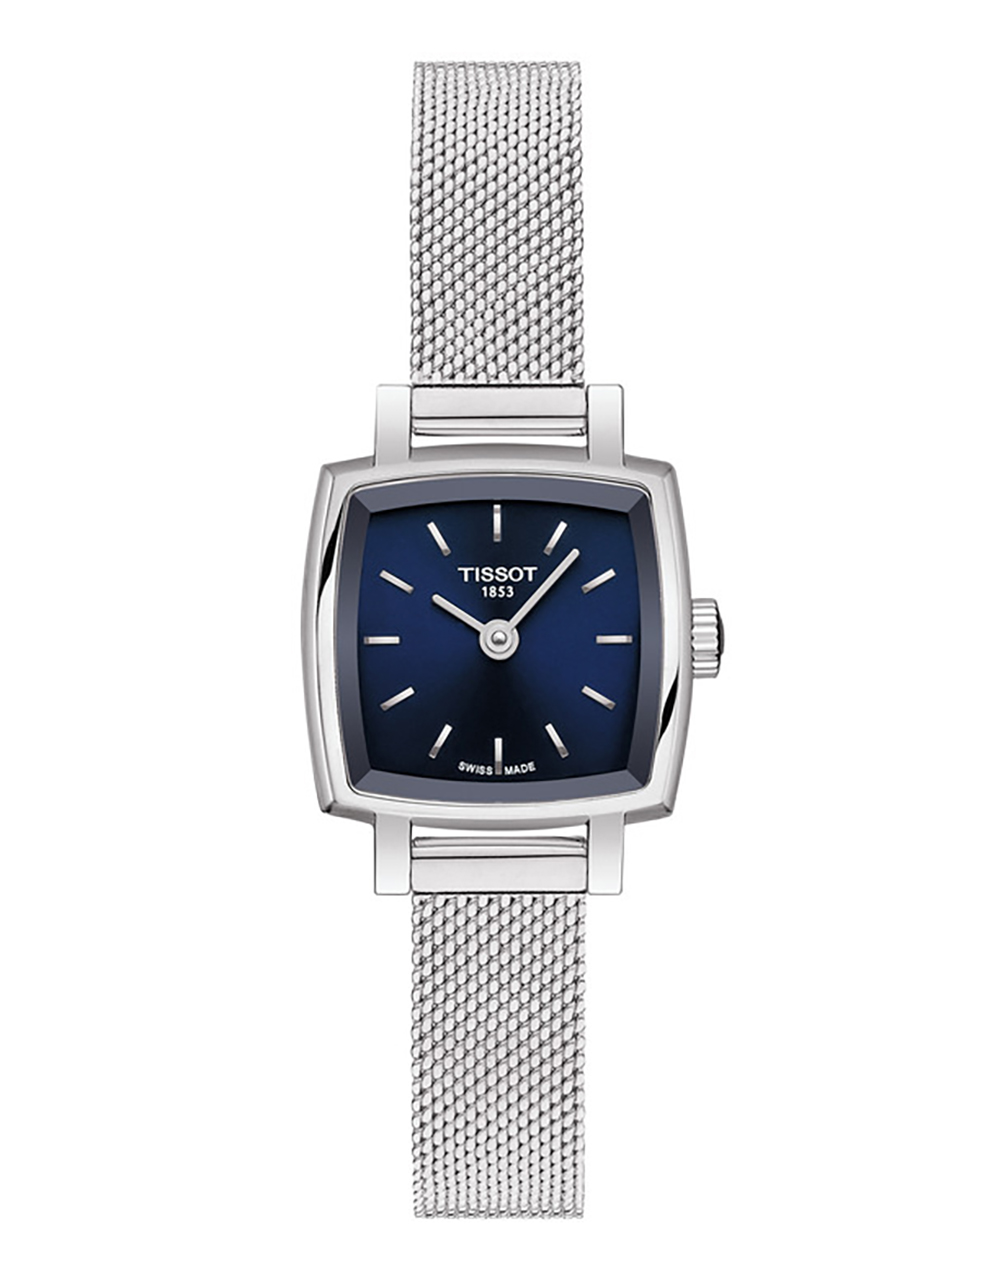 Stainless Steel Quartz Watch Name: LOVELY LADY SQ
Name of Bracelet: STAINLESS MESH
Clasp: Buckle
Finish: Polished
Dial Color: BLUE
MM: 20